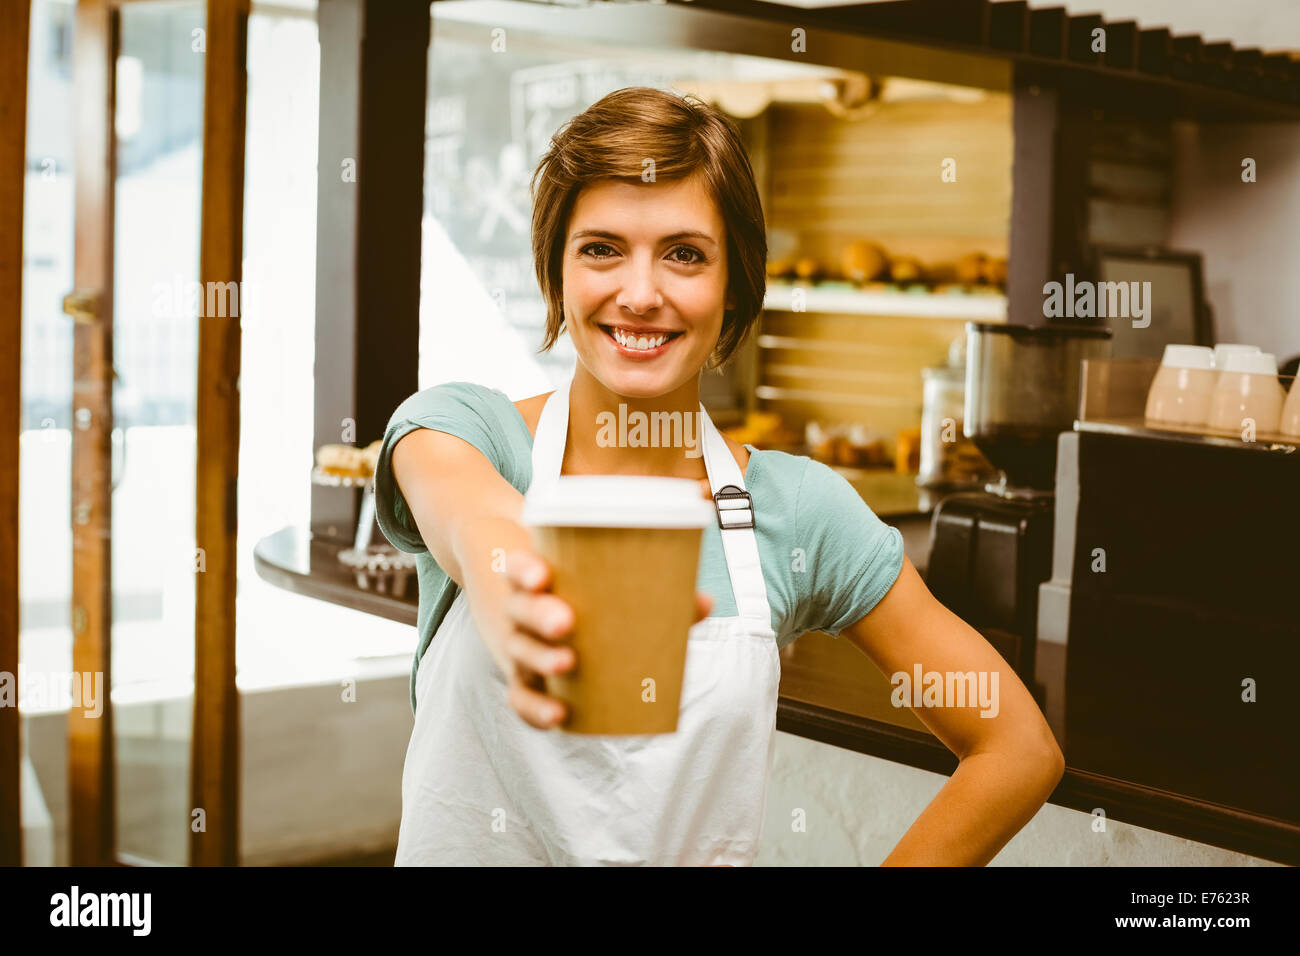 Barista Pretty smiling at camera holding disposable cup Banque D'Images